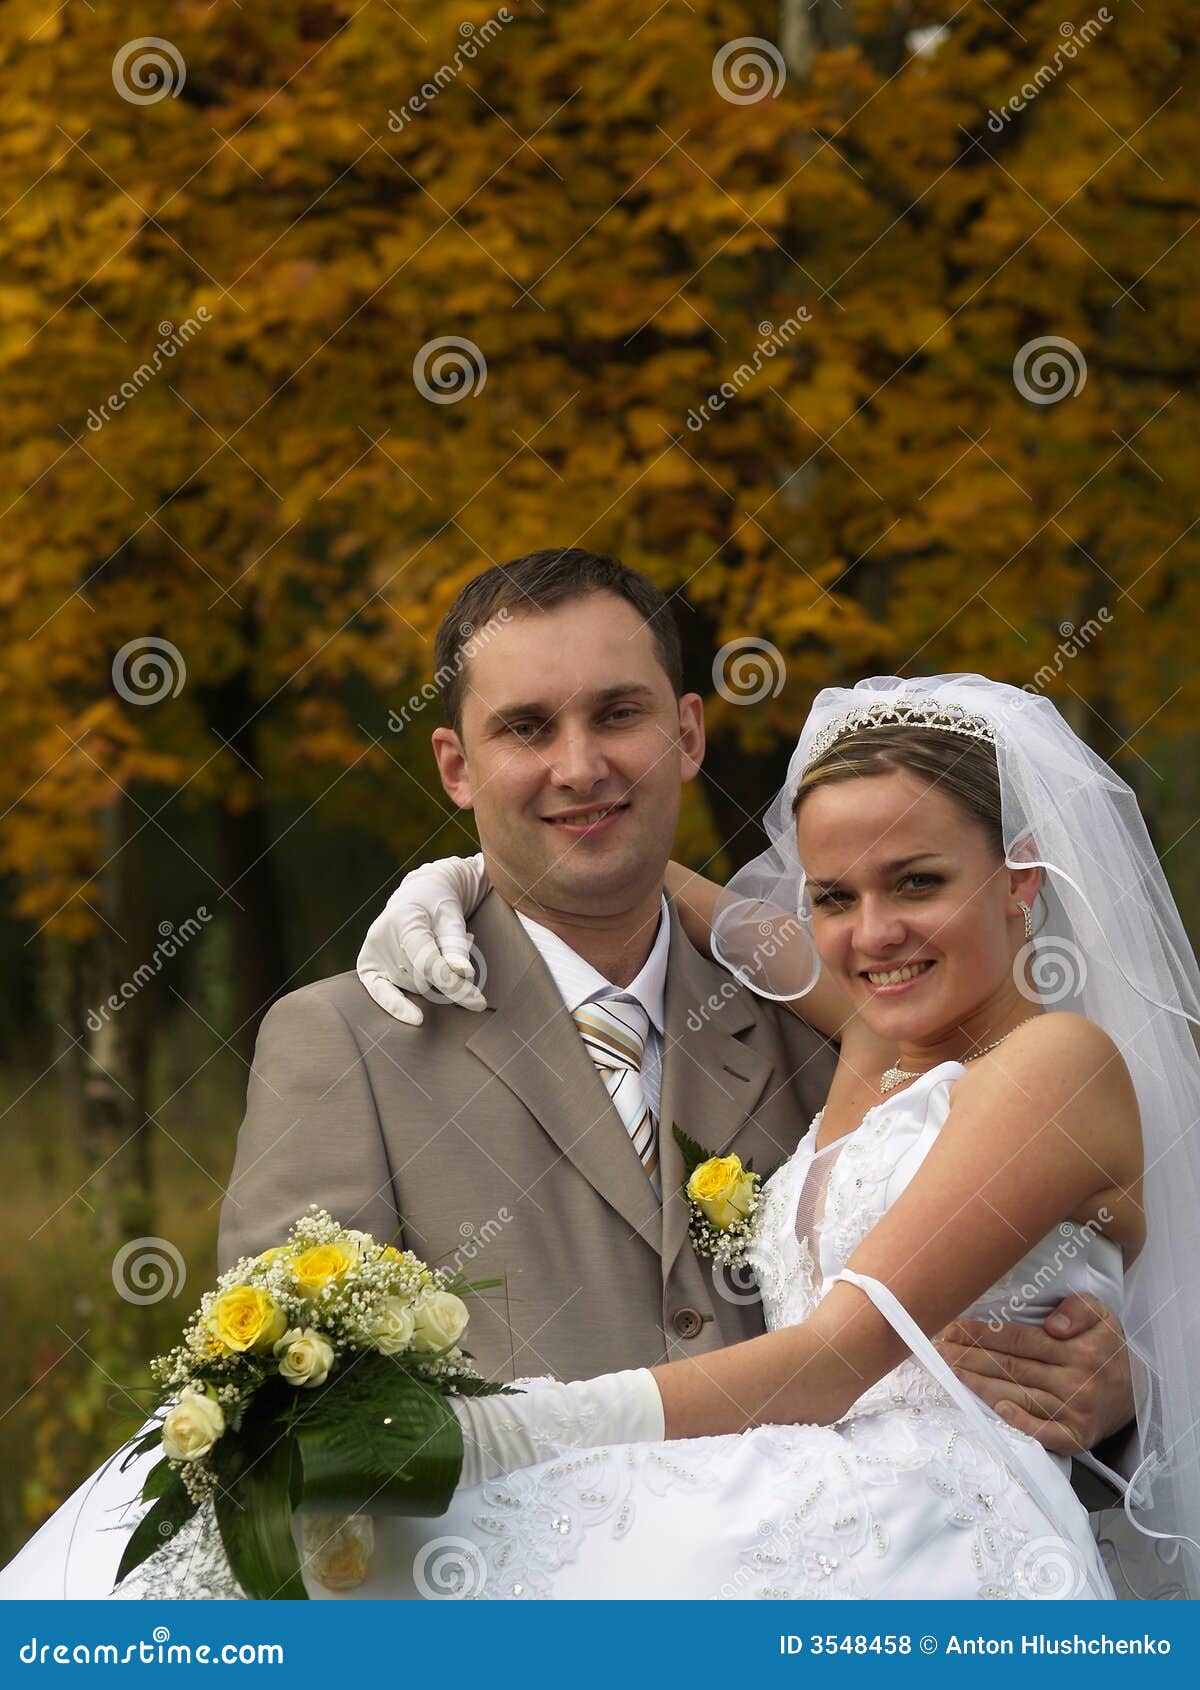 Just Married Portrait in Trees Stock Photo - Image of staring, people ...